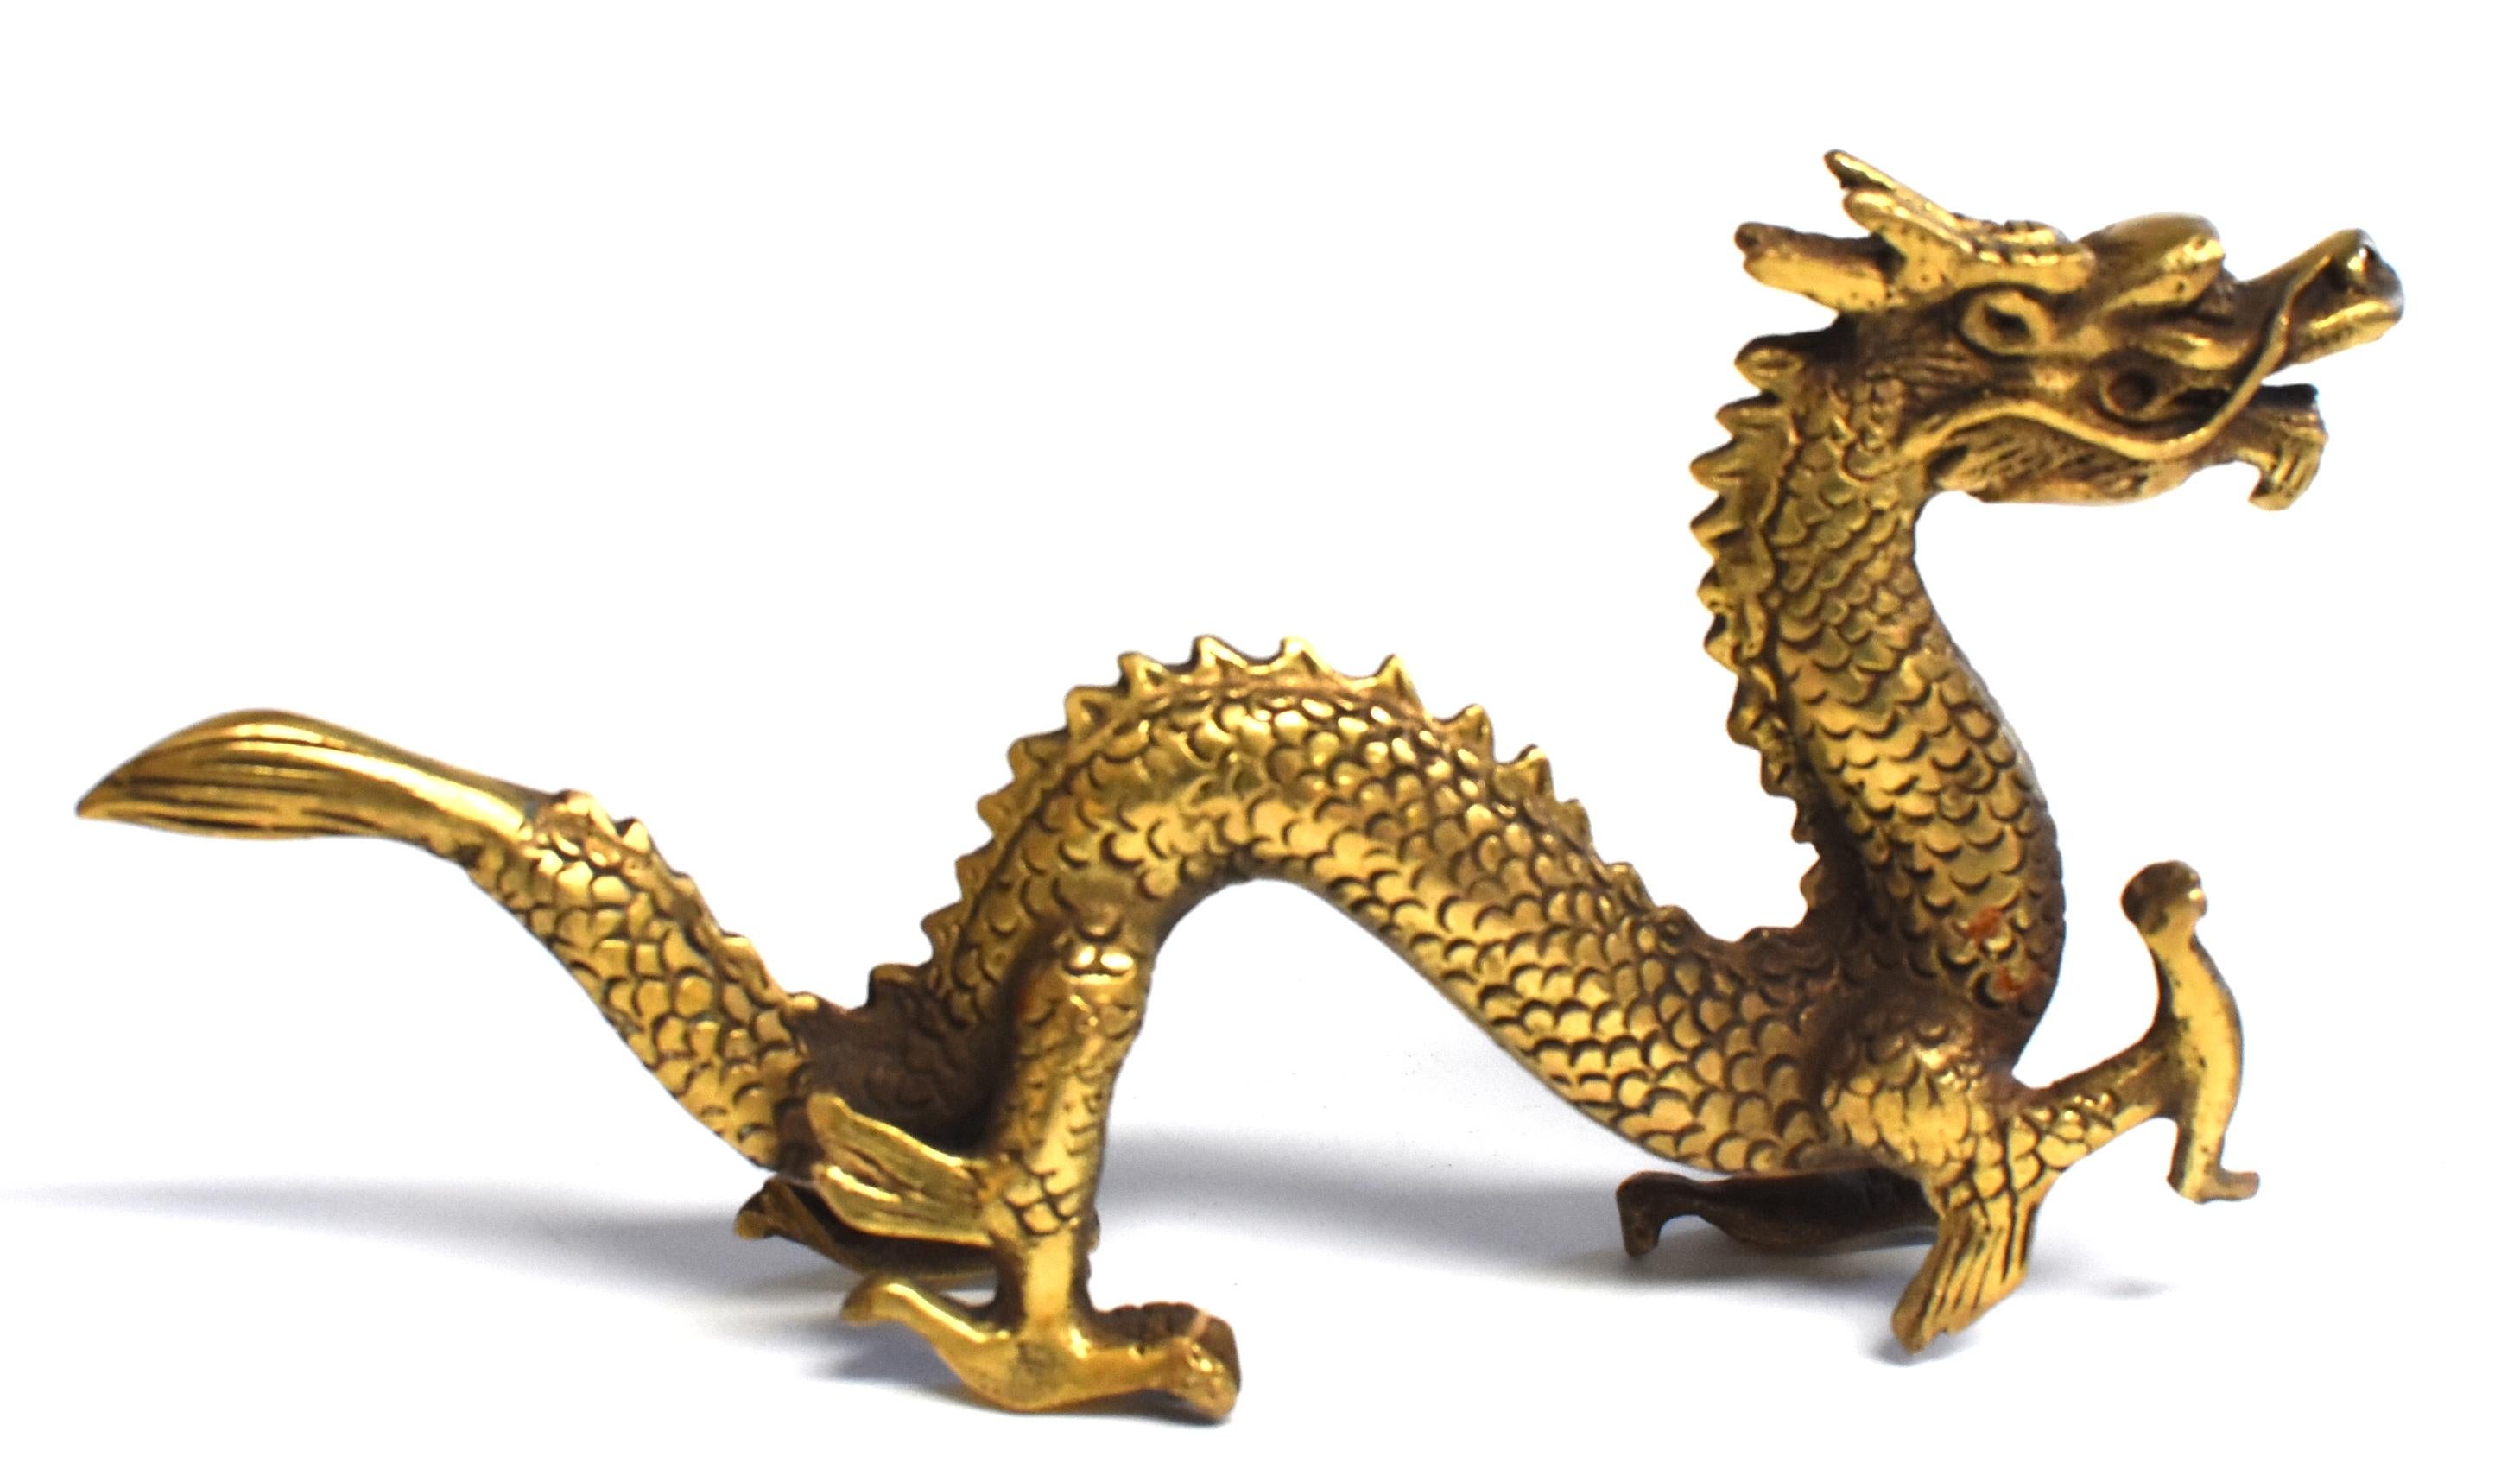 A beautiful small statue of dragon in the late Qing dynasty style. The four-clawed dragon has one front talon in pursuit of its subject, likely a flaming pearl, while the other three are firmly planted on the ground. The head strains forward with